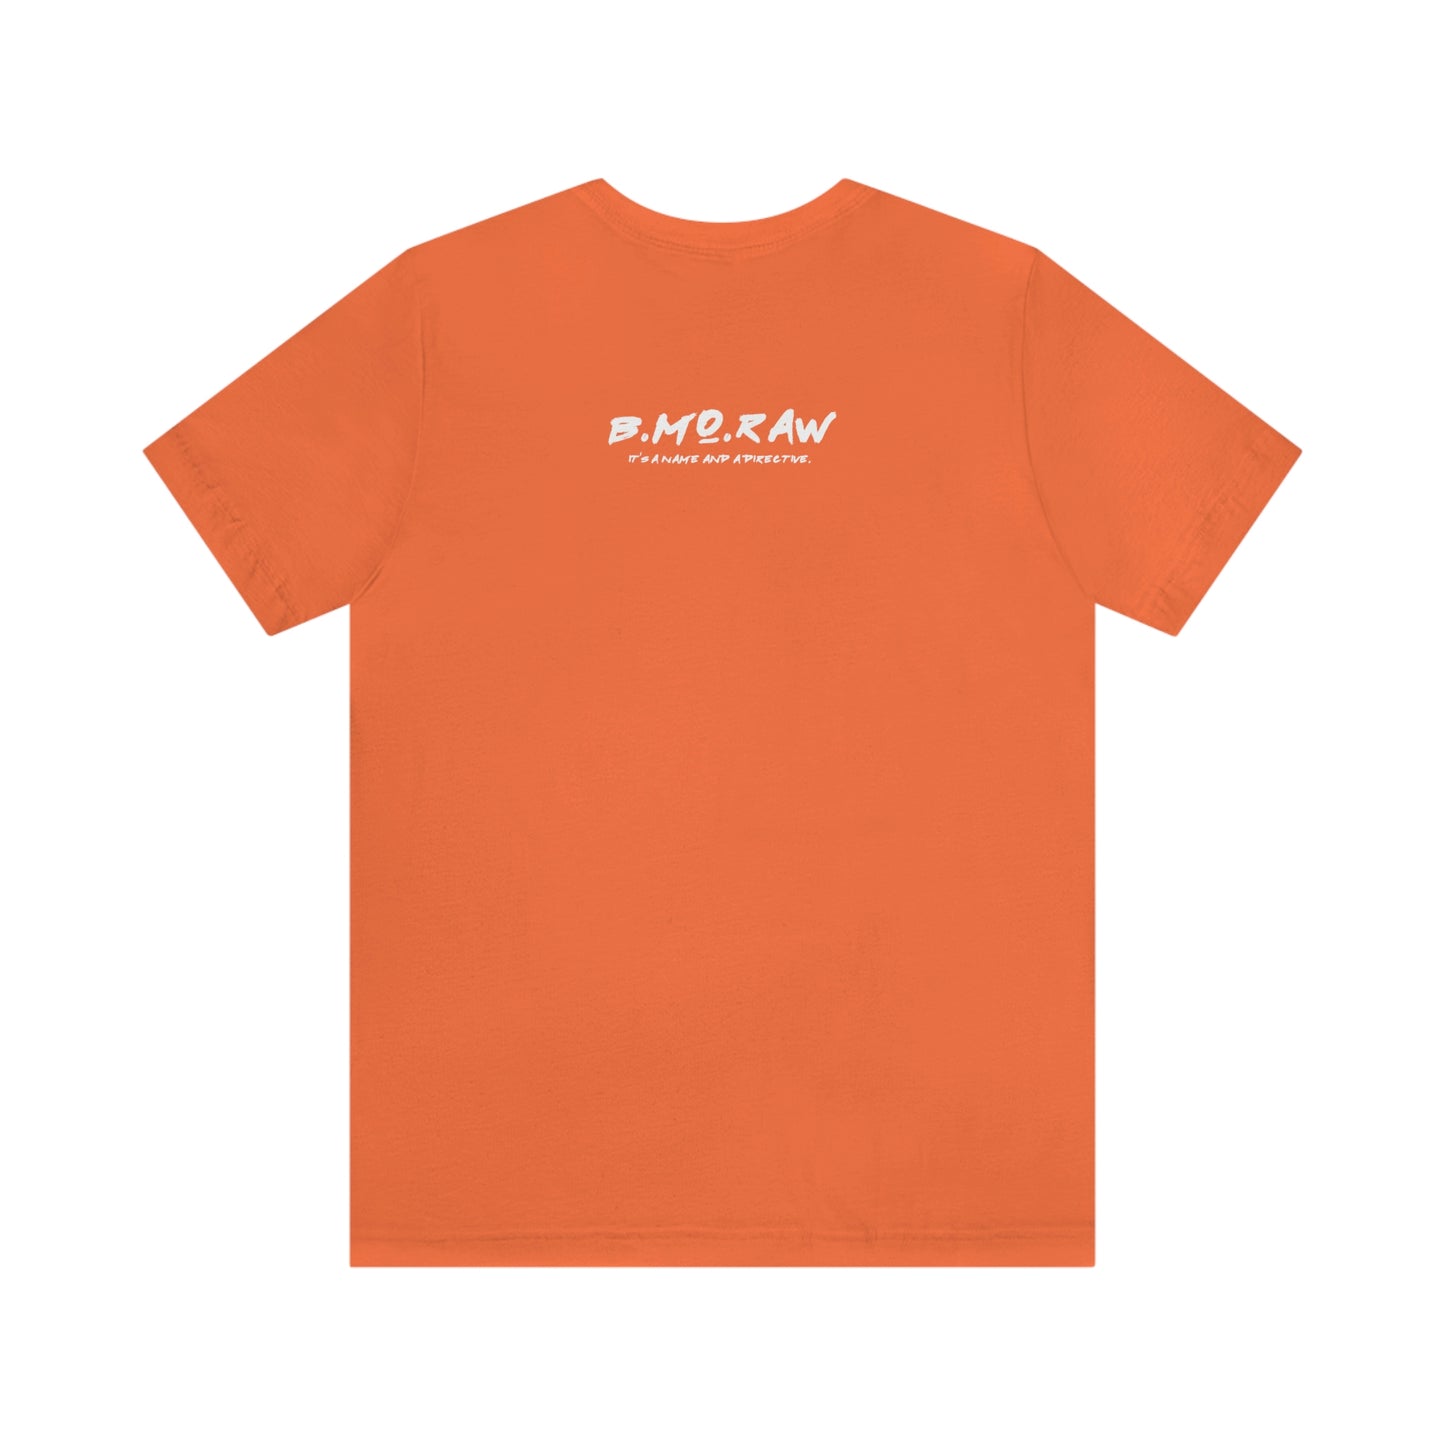 FTP, A Raw-ism - Tee